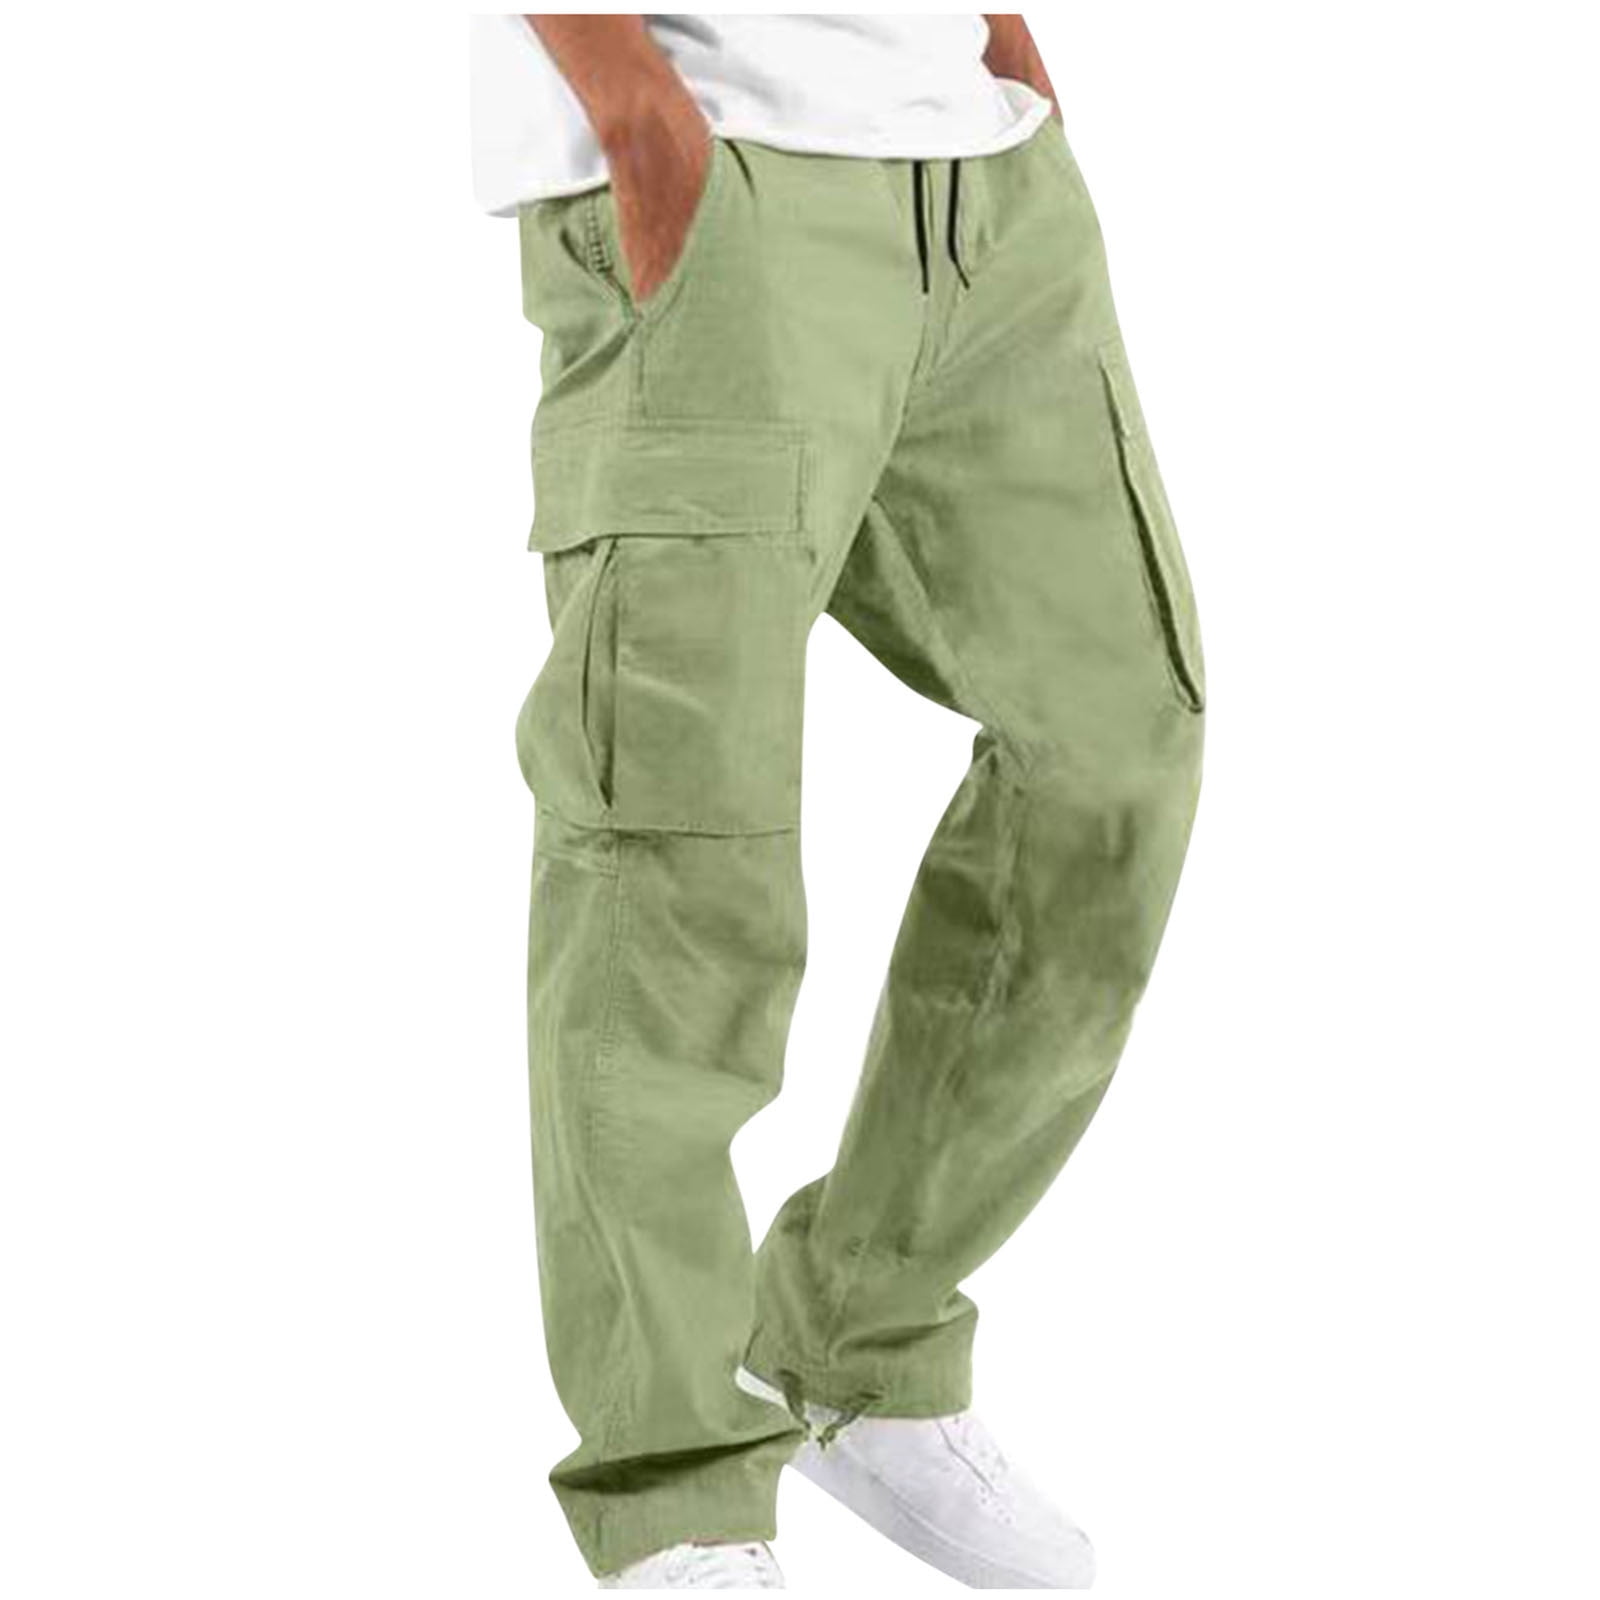 fartey Work Pants for Men Cotton Drawstring Elastic Waist Cargo Pants  Casual Multi Pockets Outdoor Fishing Hiking Trousers 